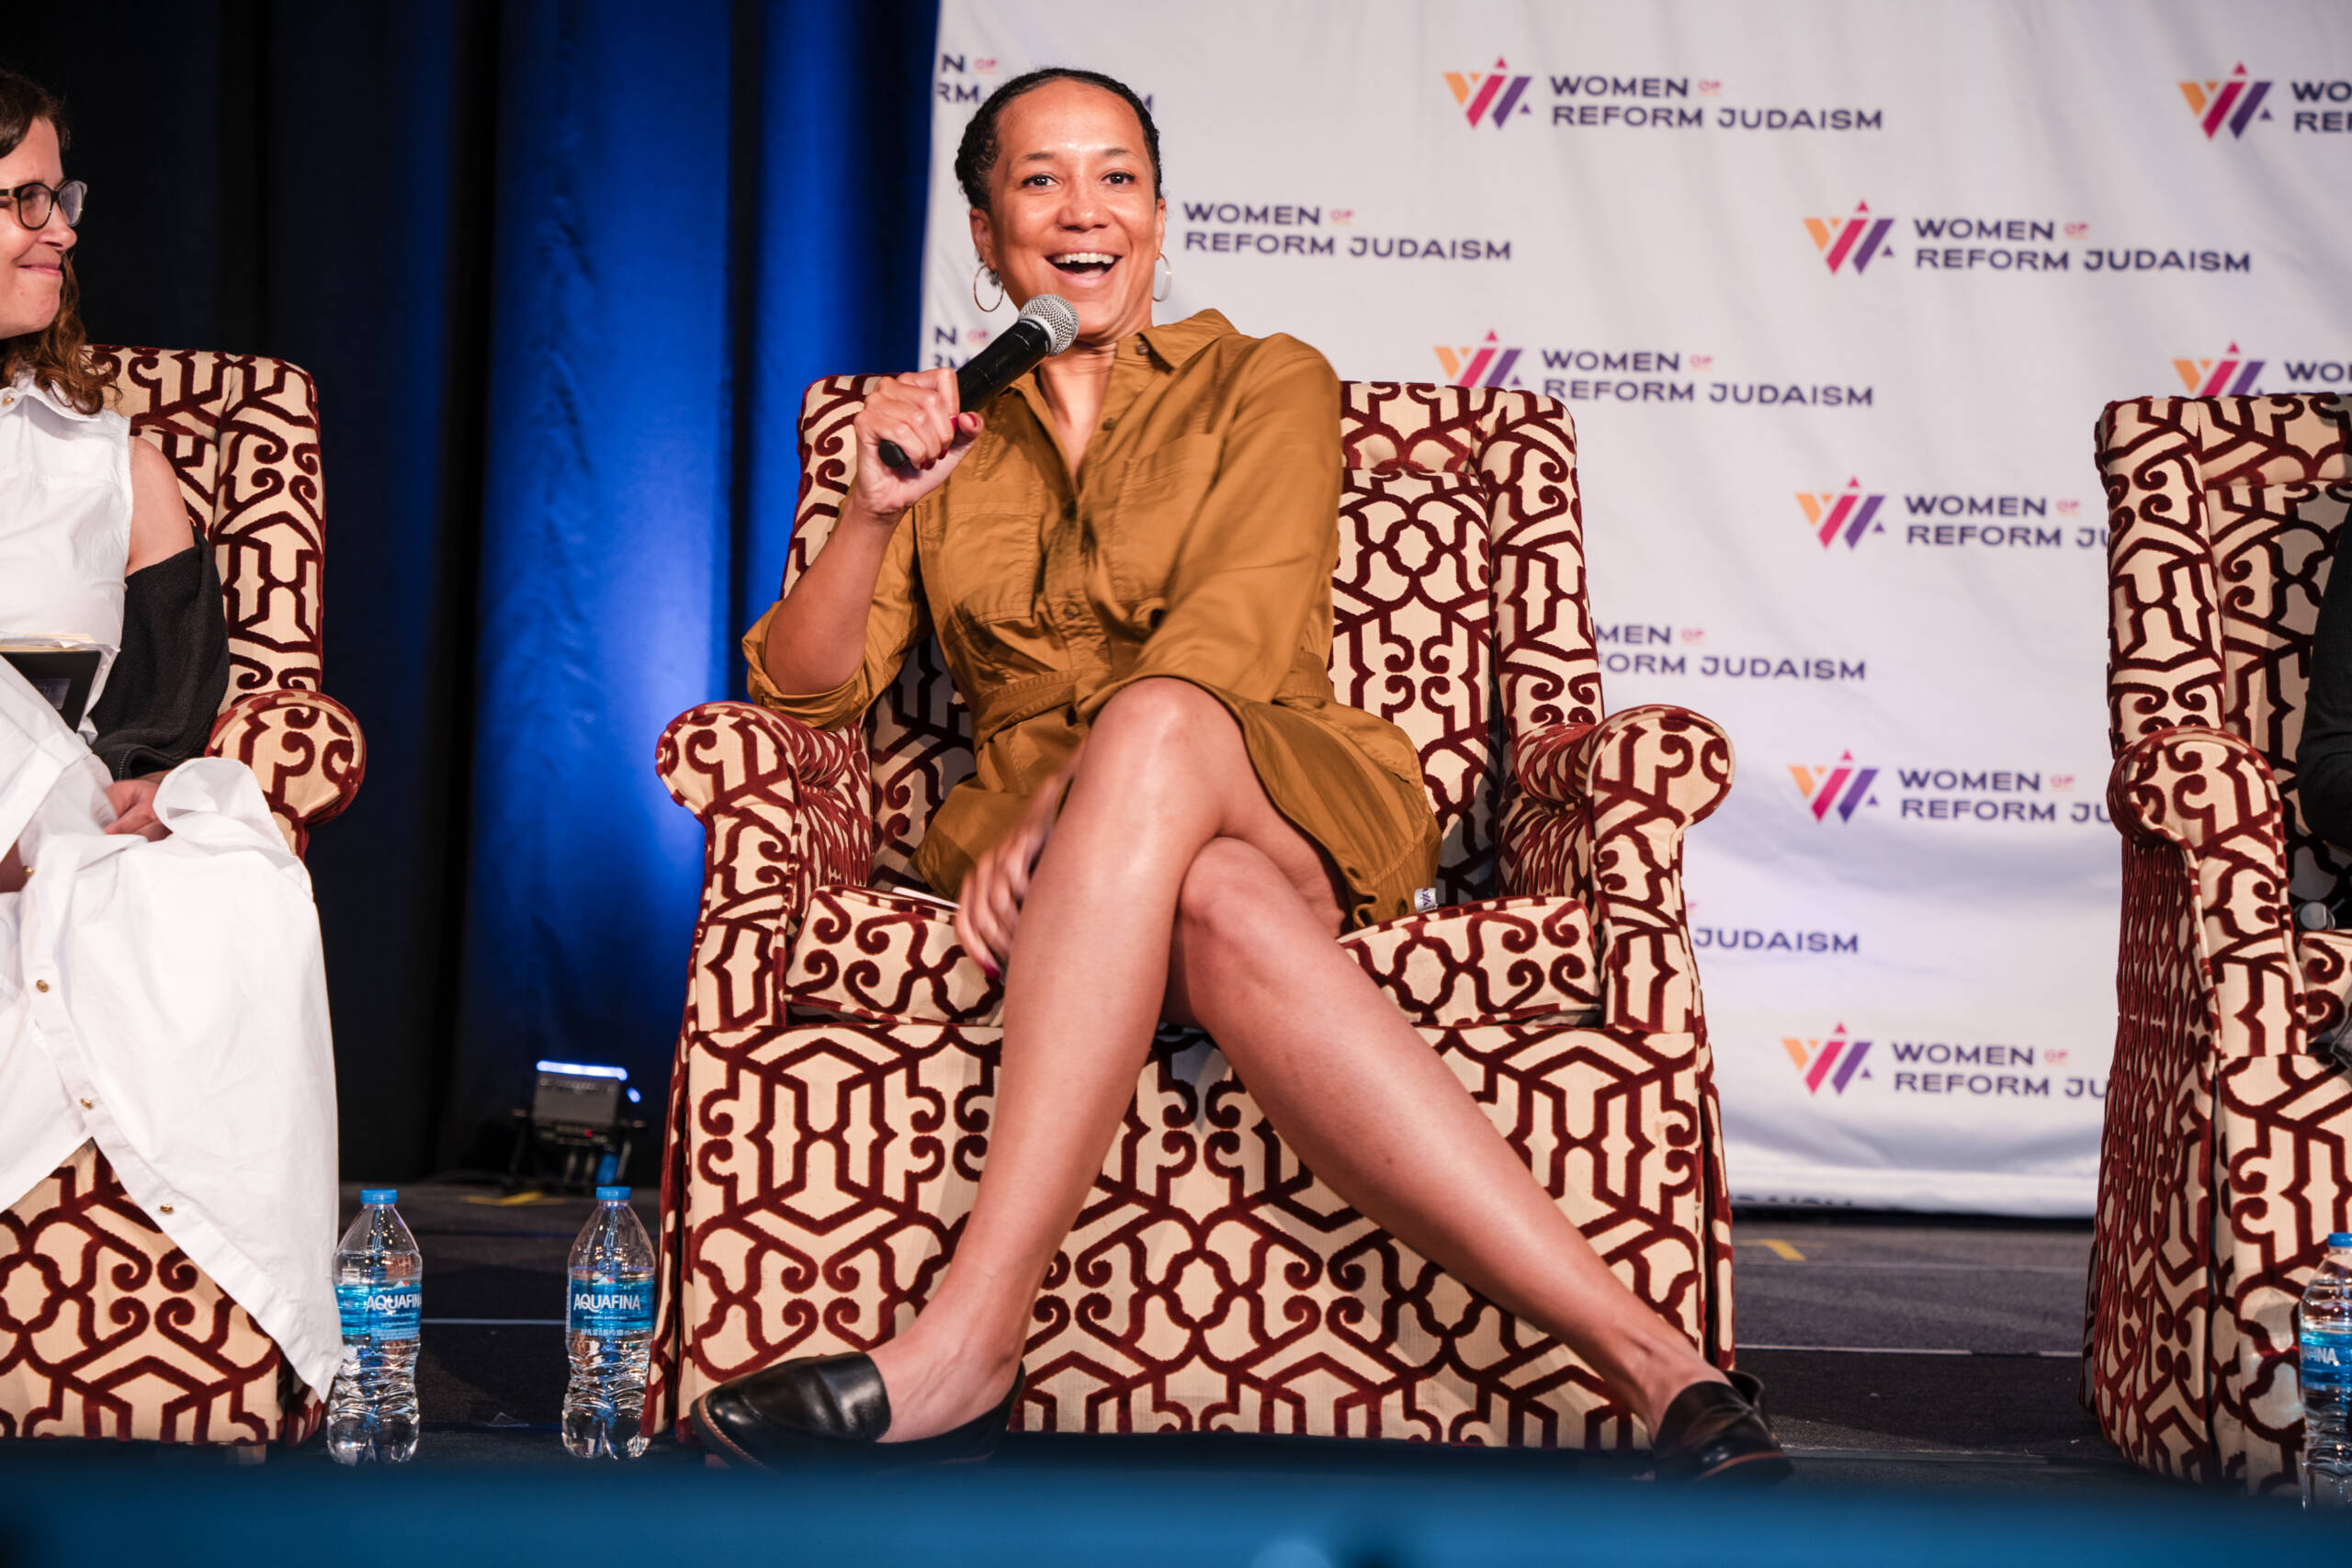 A woman sitting in a patterned chair speaking into a microphone